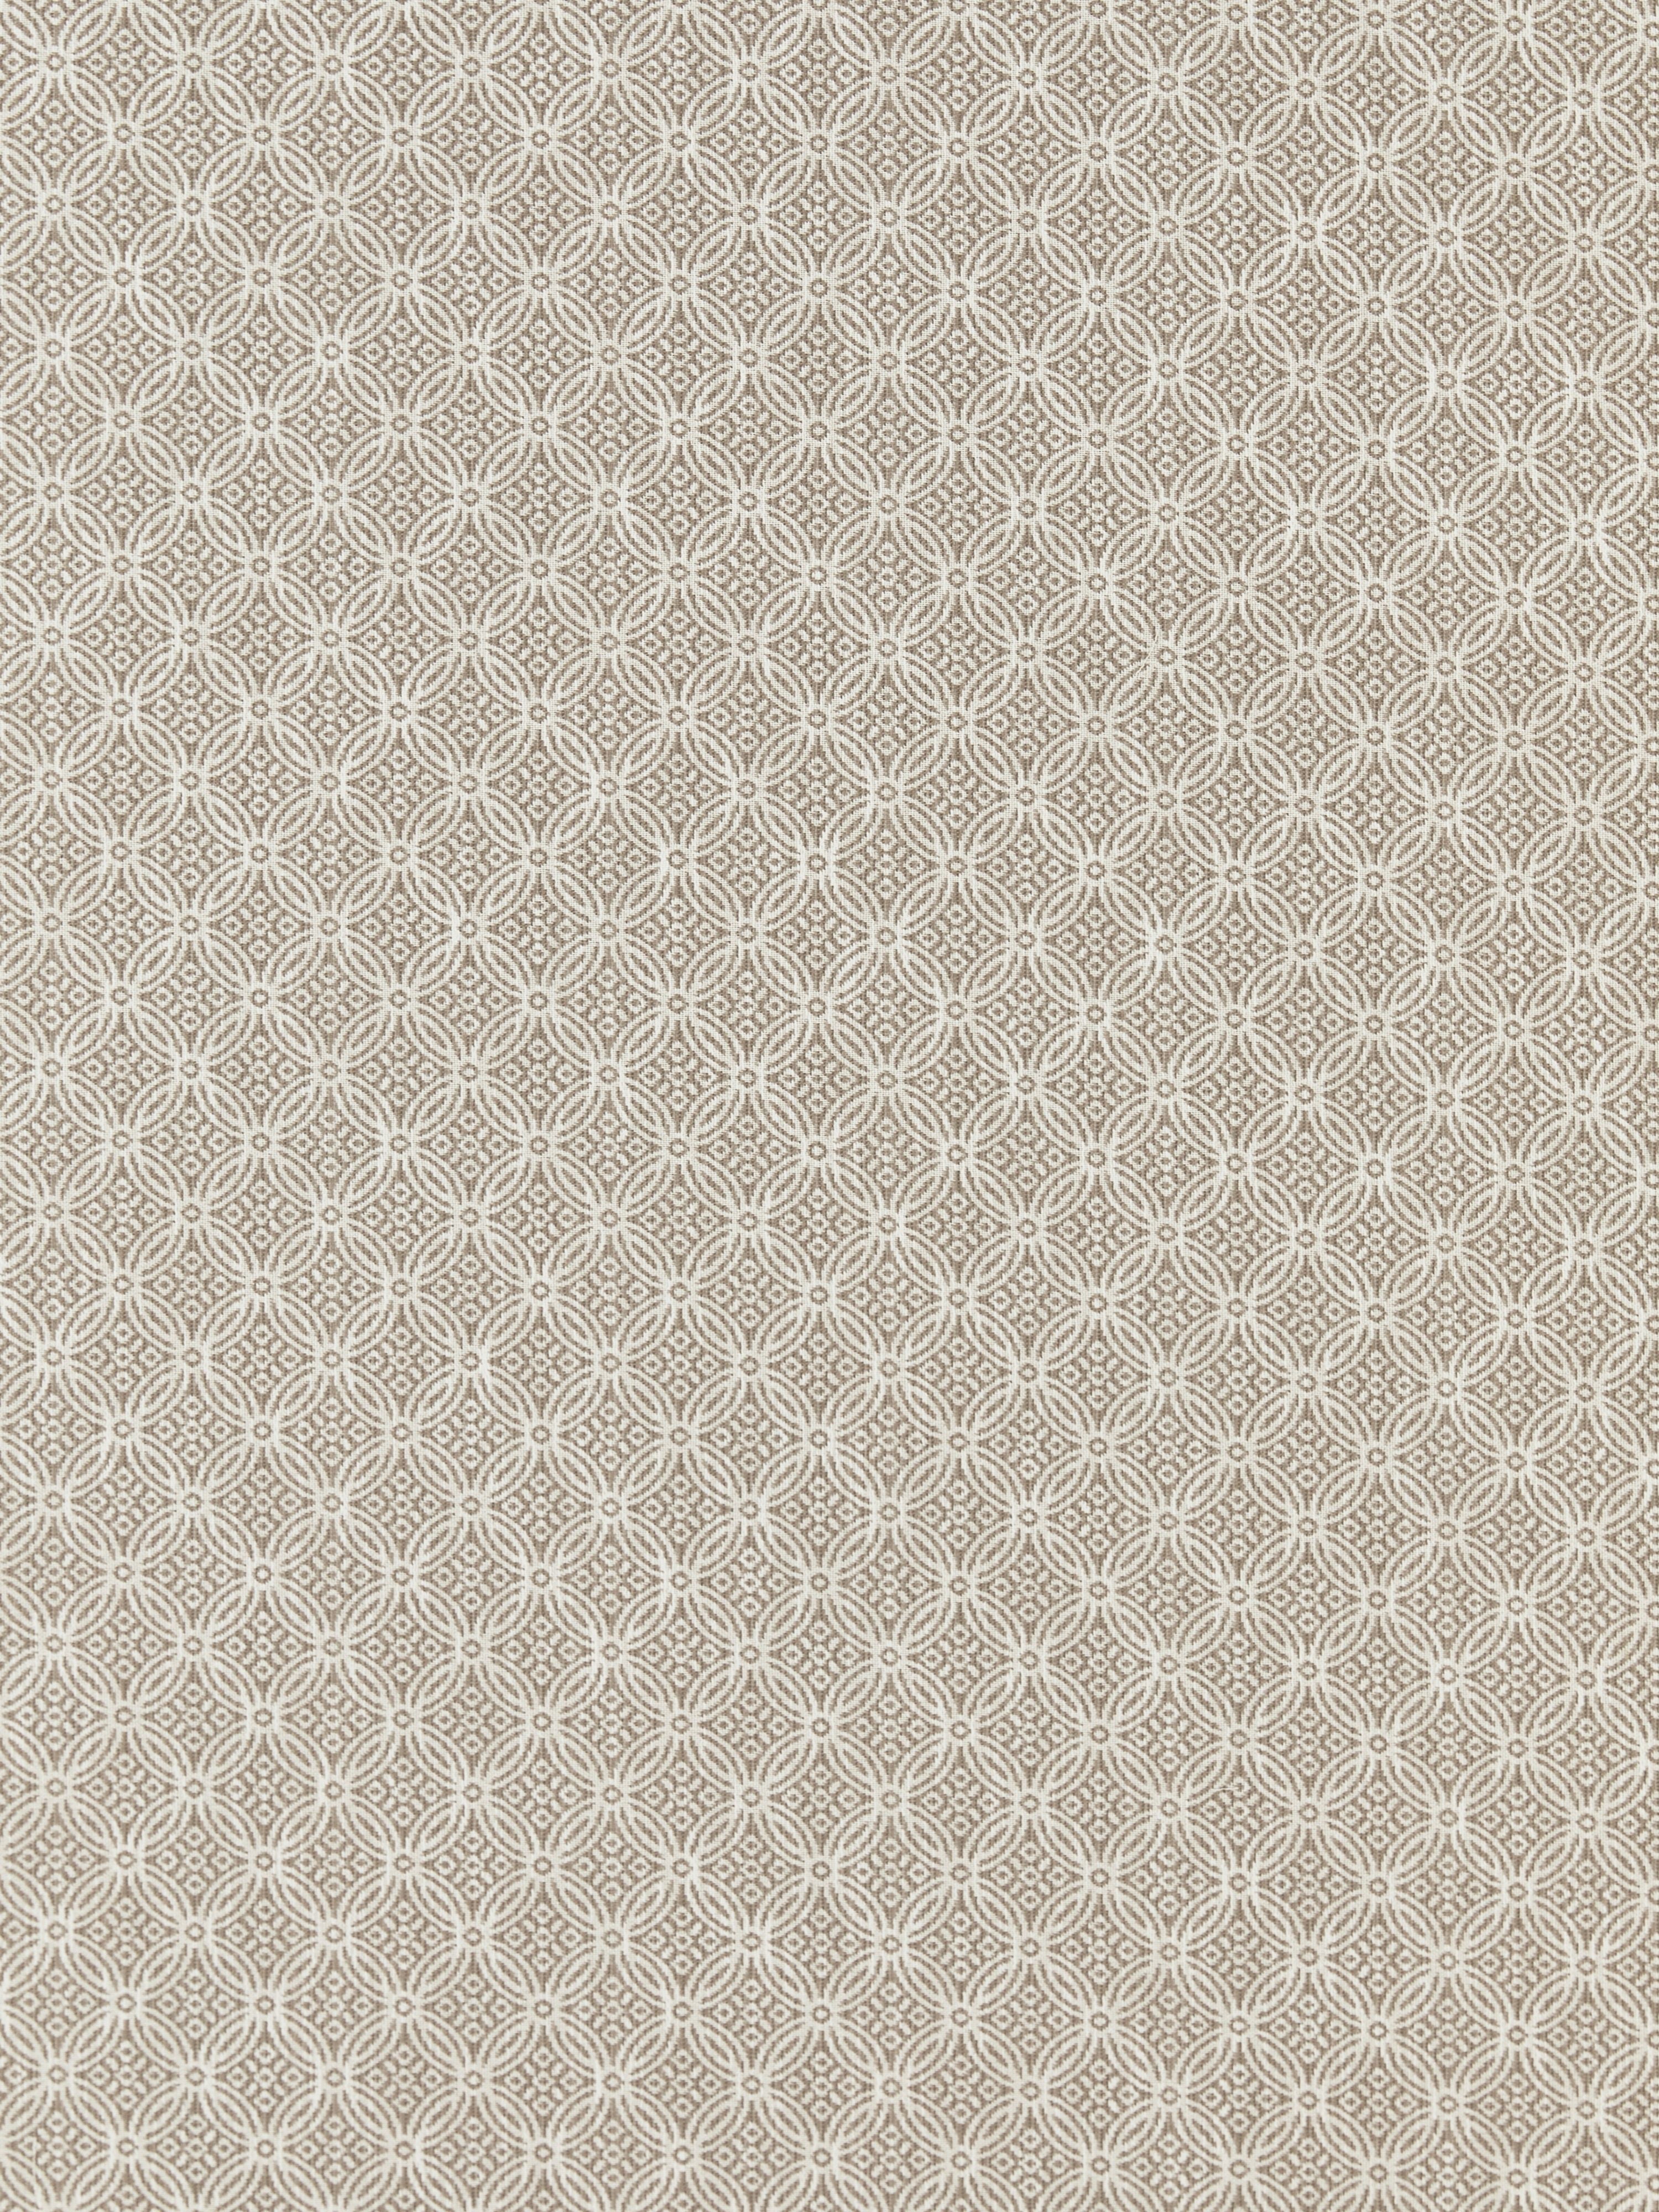 Cape May fabric in sandbar color - pattern number SC 000127317 - by Scalamandre in the Scalamandre Fabrics Book 1 collection